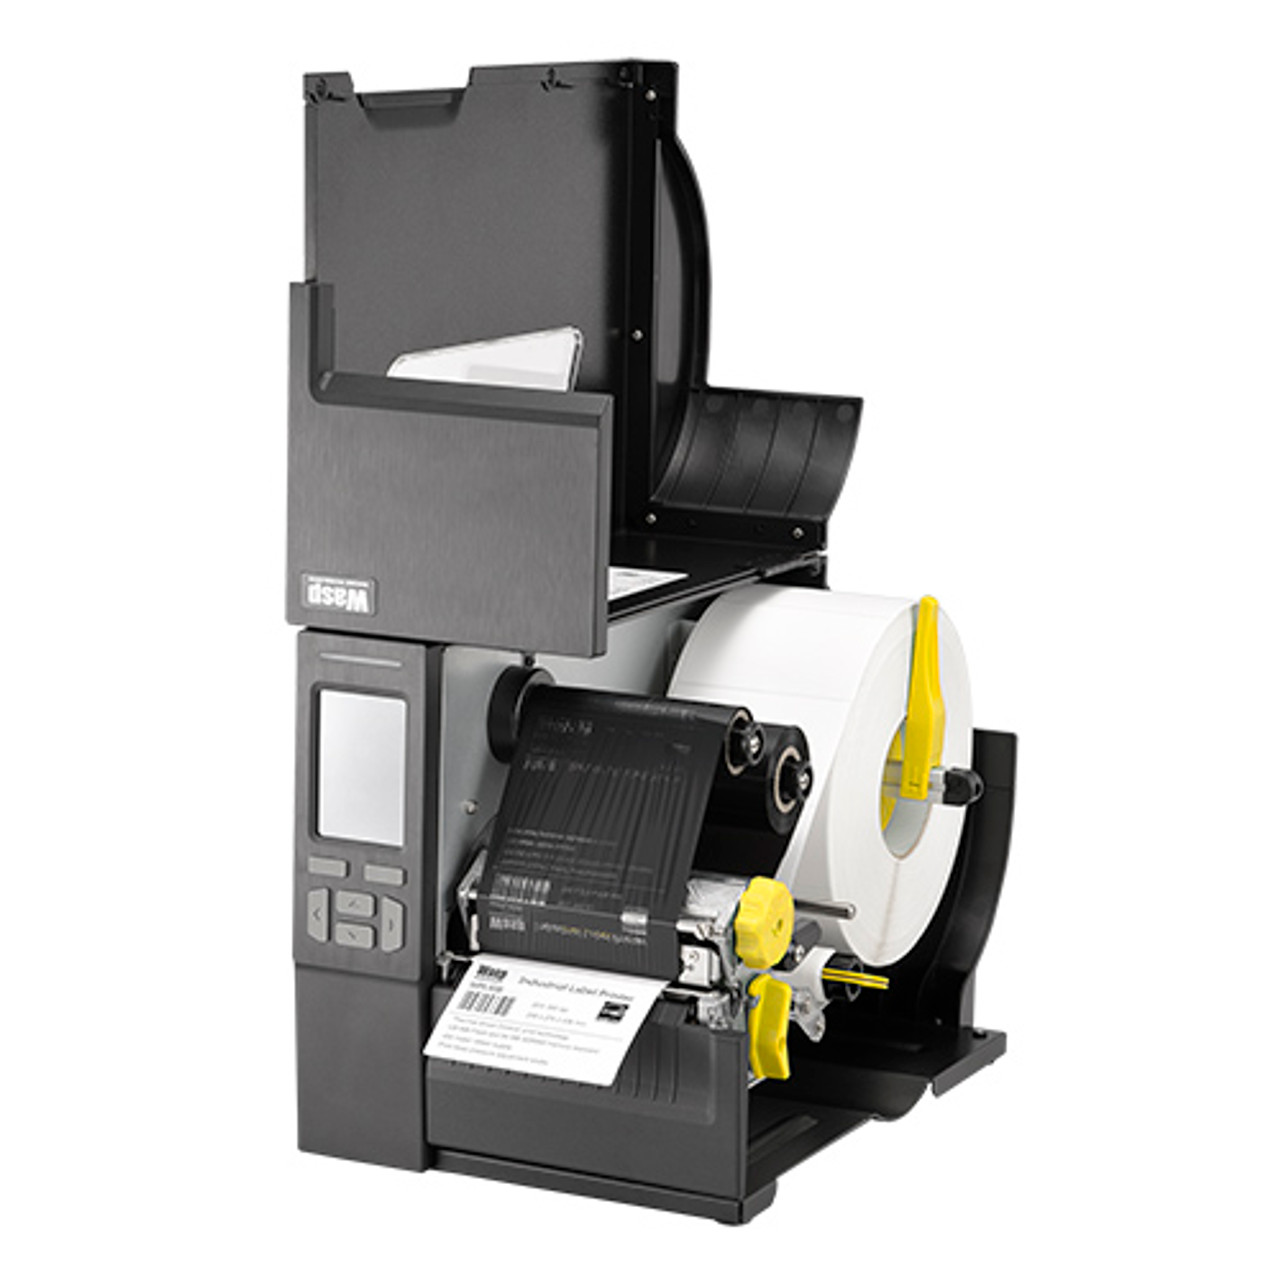 Wasp WPL408 Industrial Barcode Label Printer